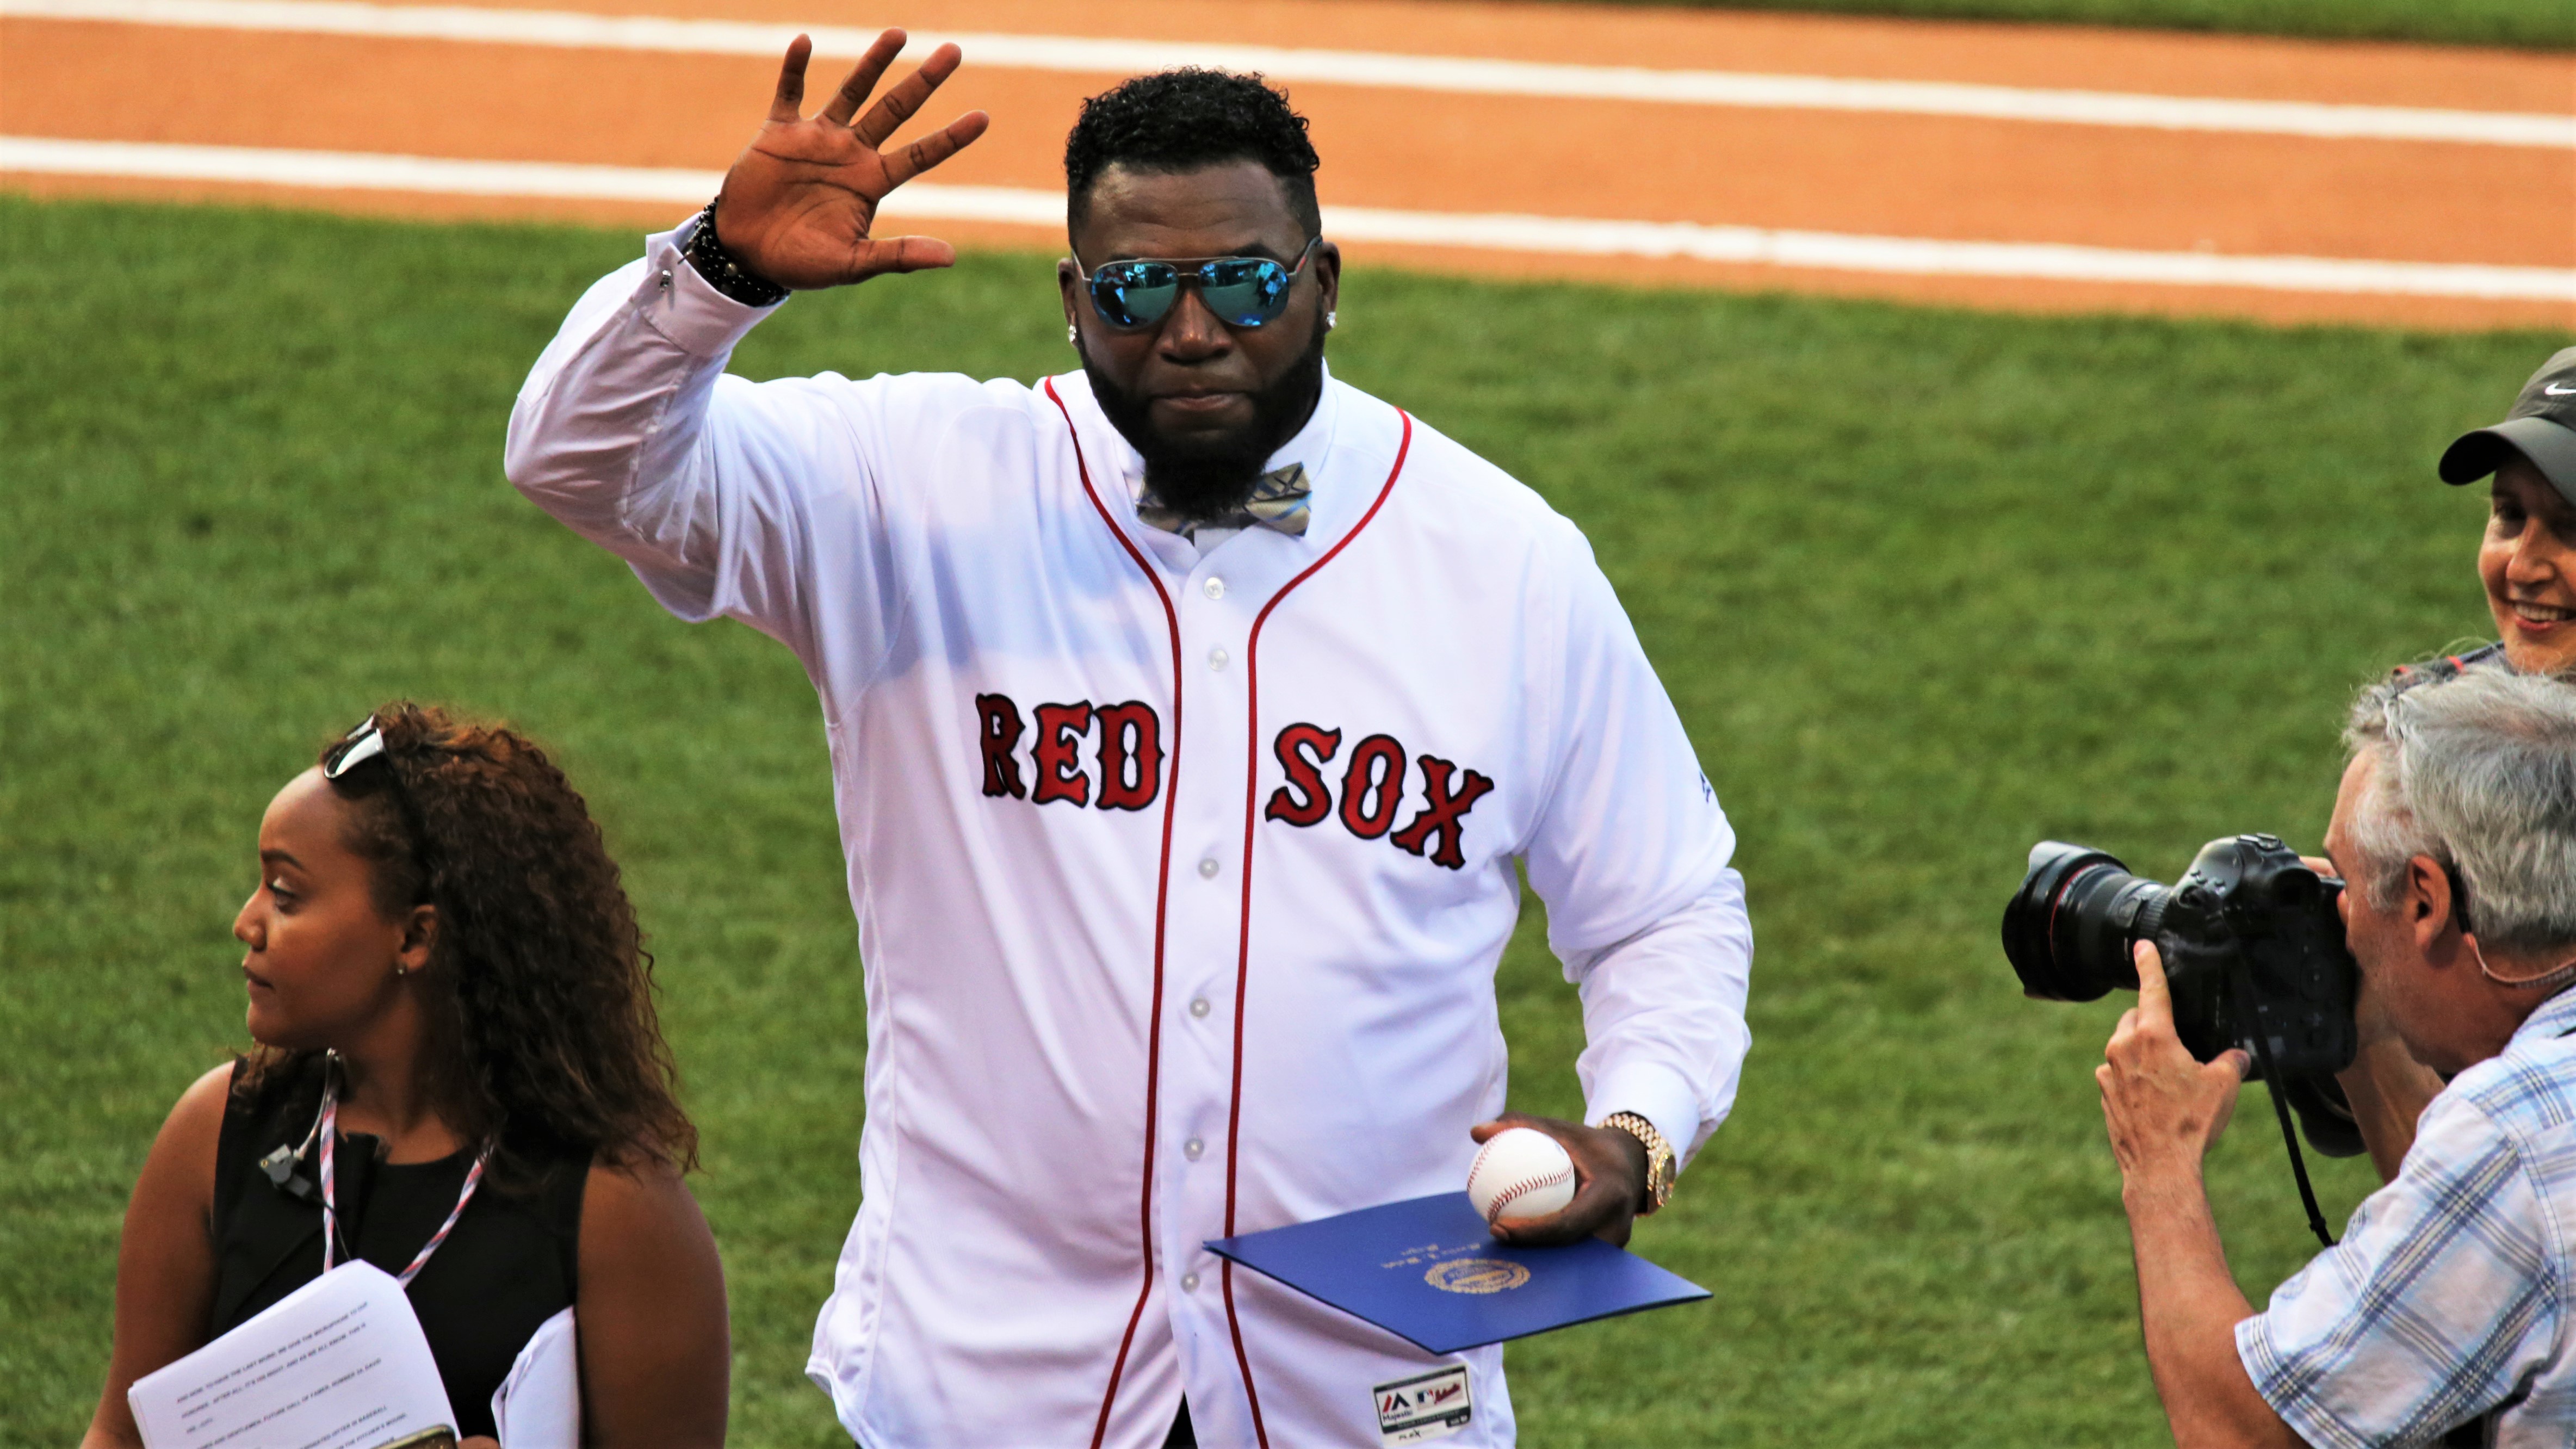 David Ortiz Still The Leading Hall Of Fame Vote-Getter, But Outlook May Not Be Great For First-Year Induction